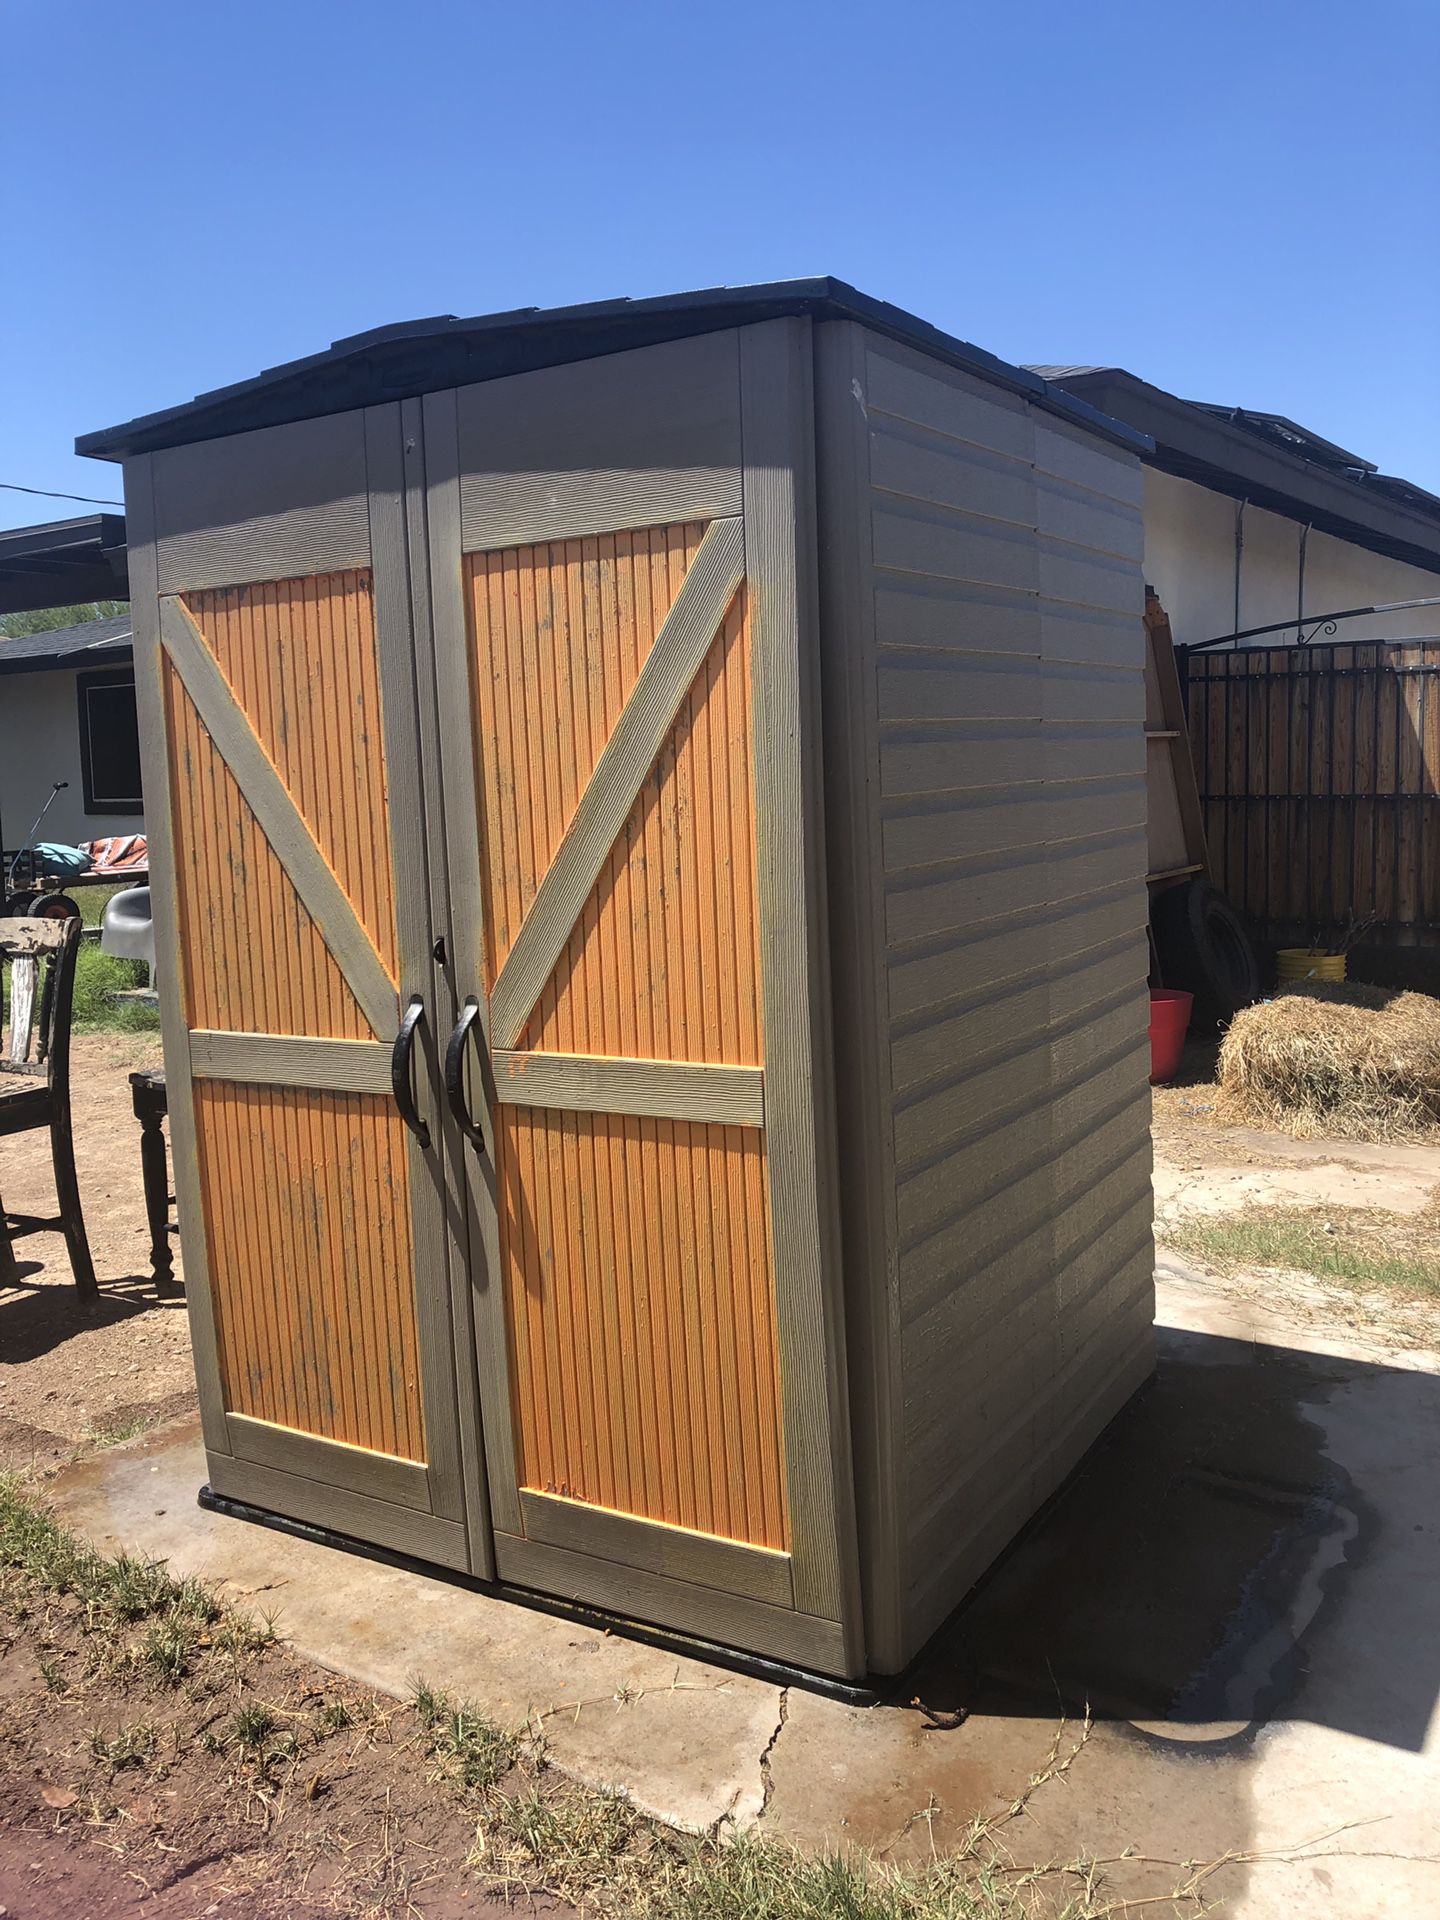 Rubbermaid shed